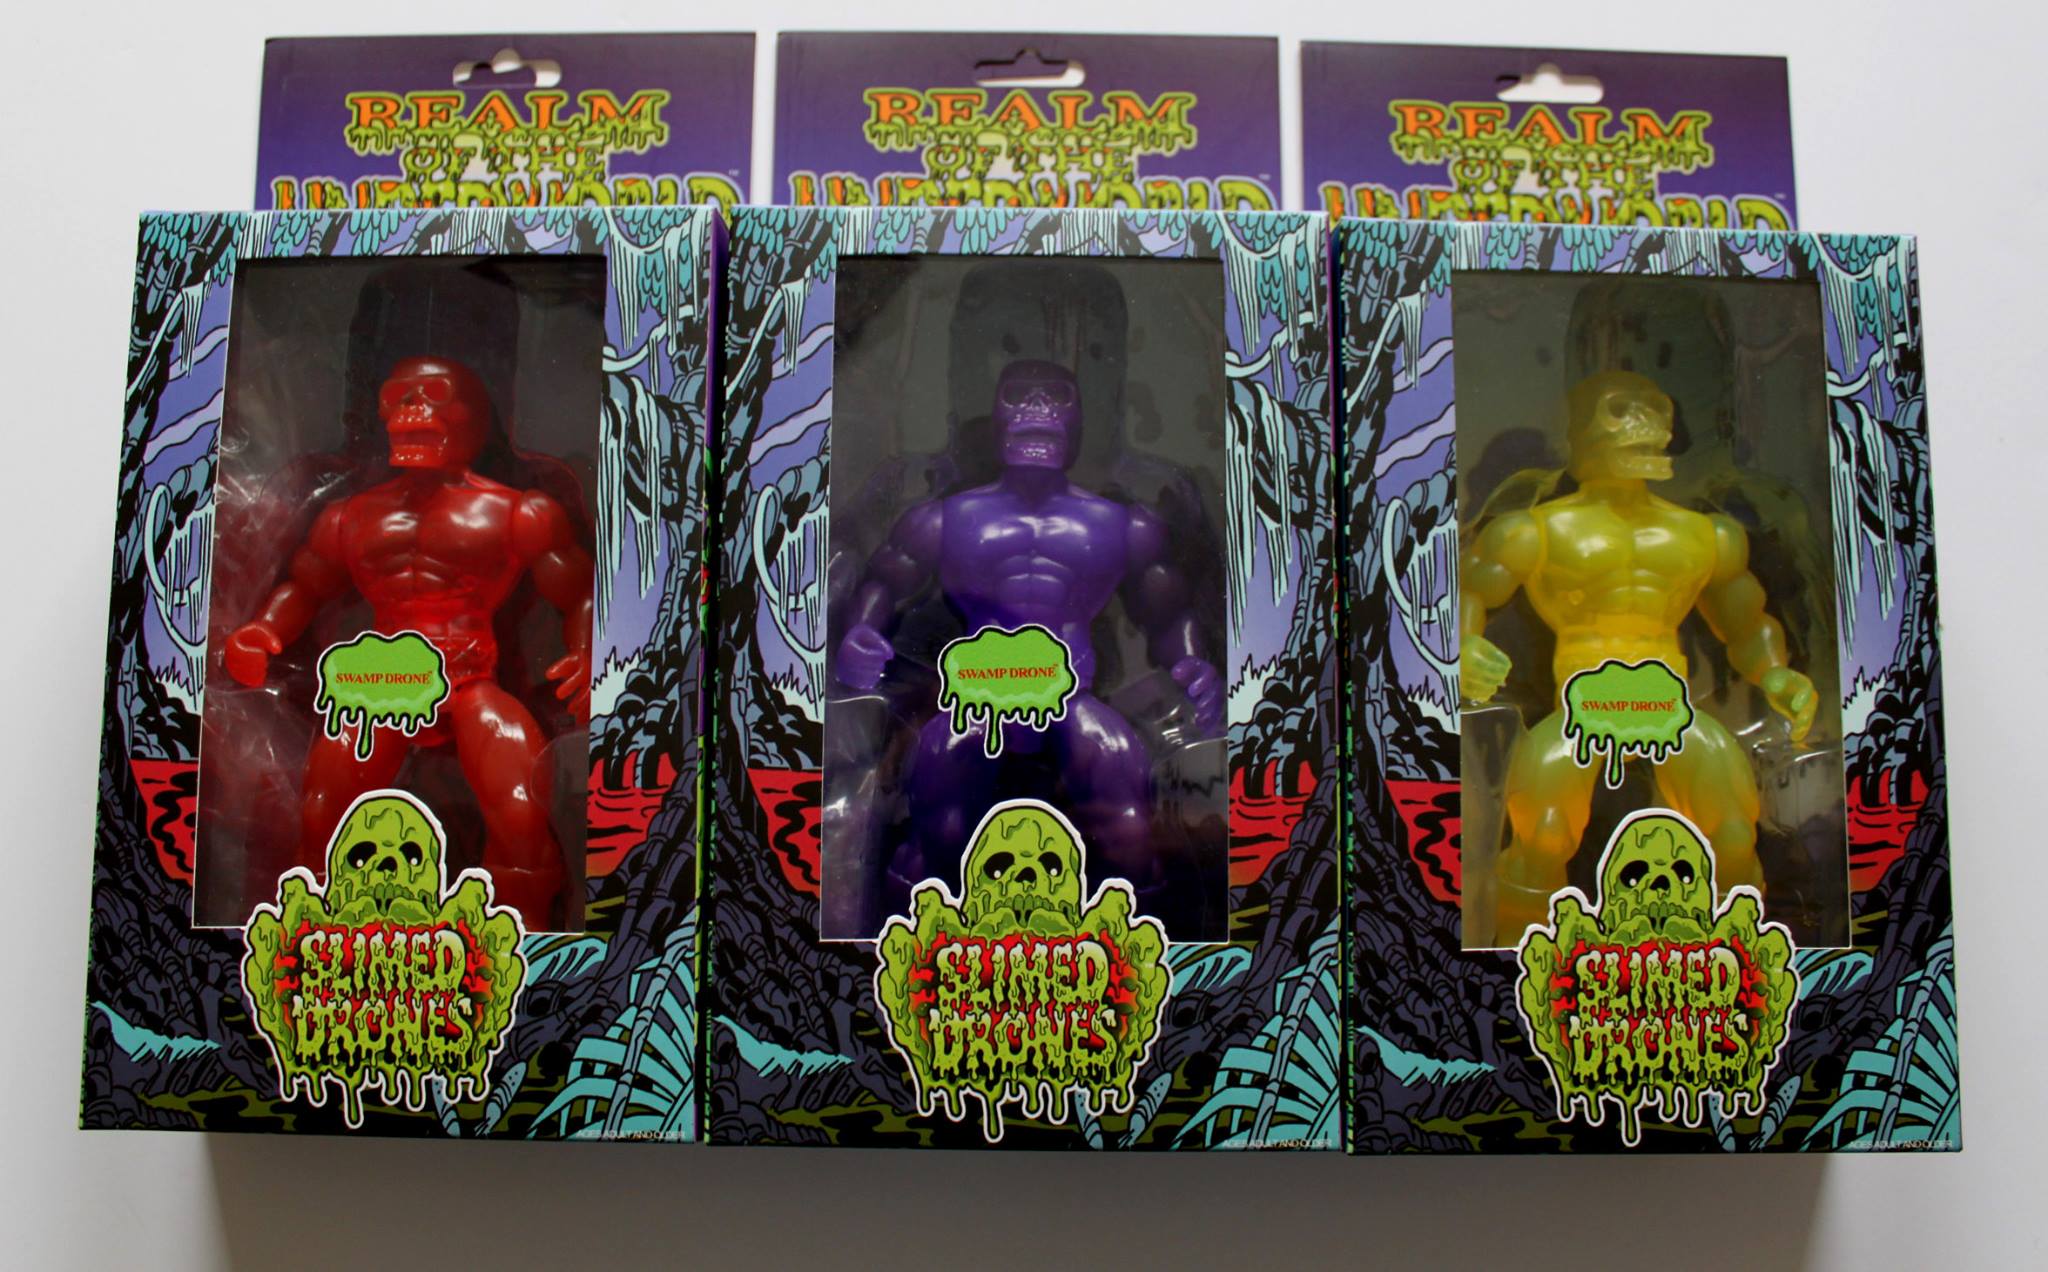 Swamp Drone Yellow Hallucination Slime Drones Action Figure - Click Image to Close